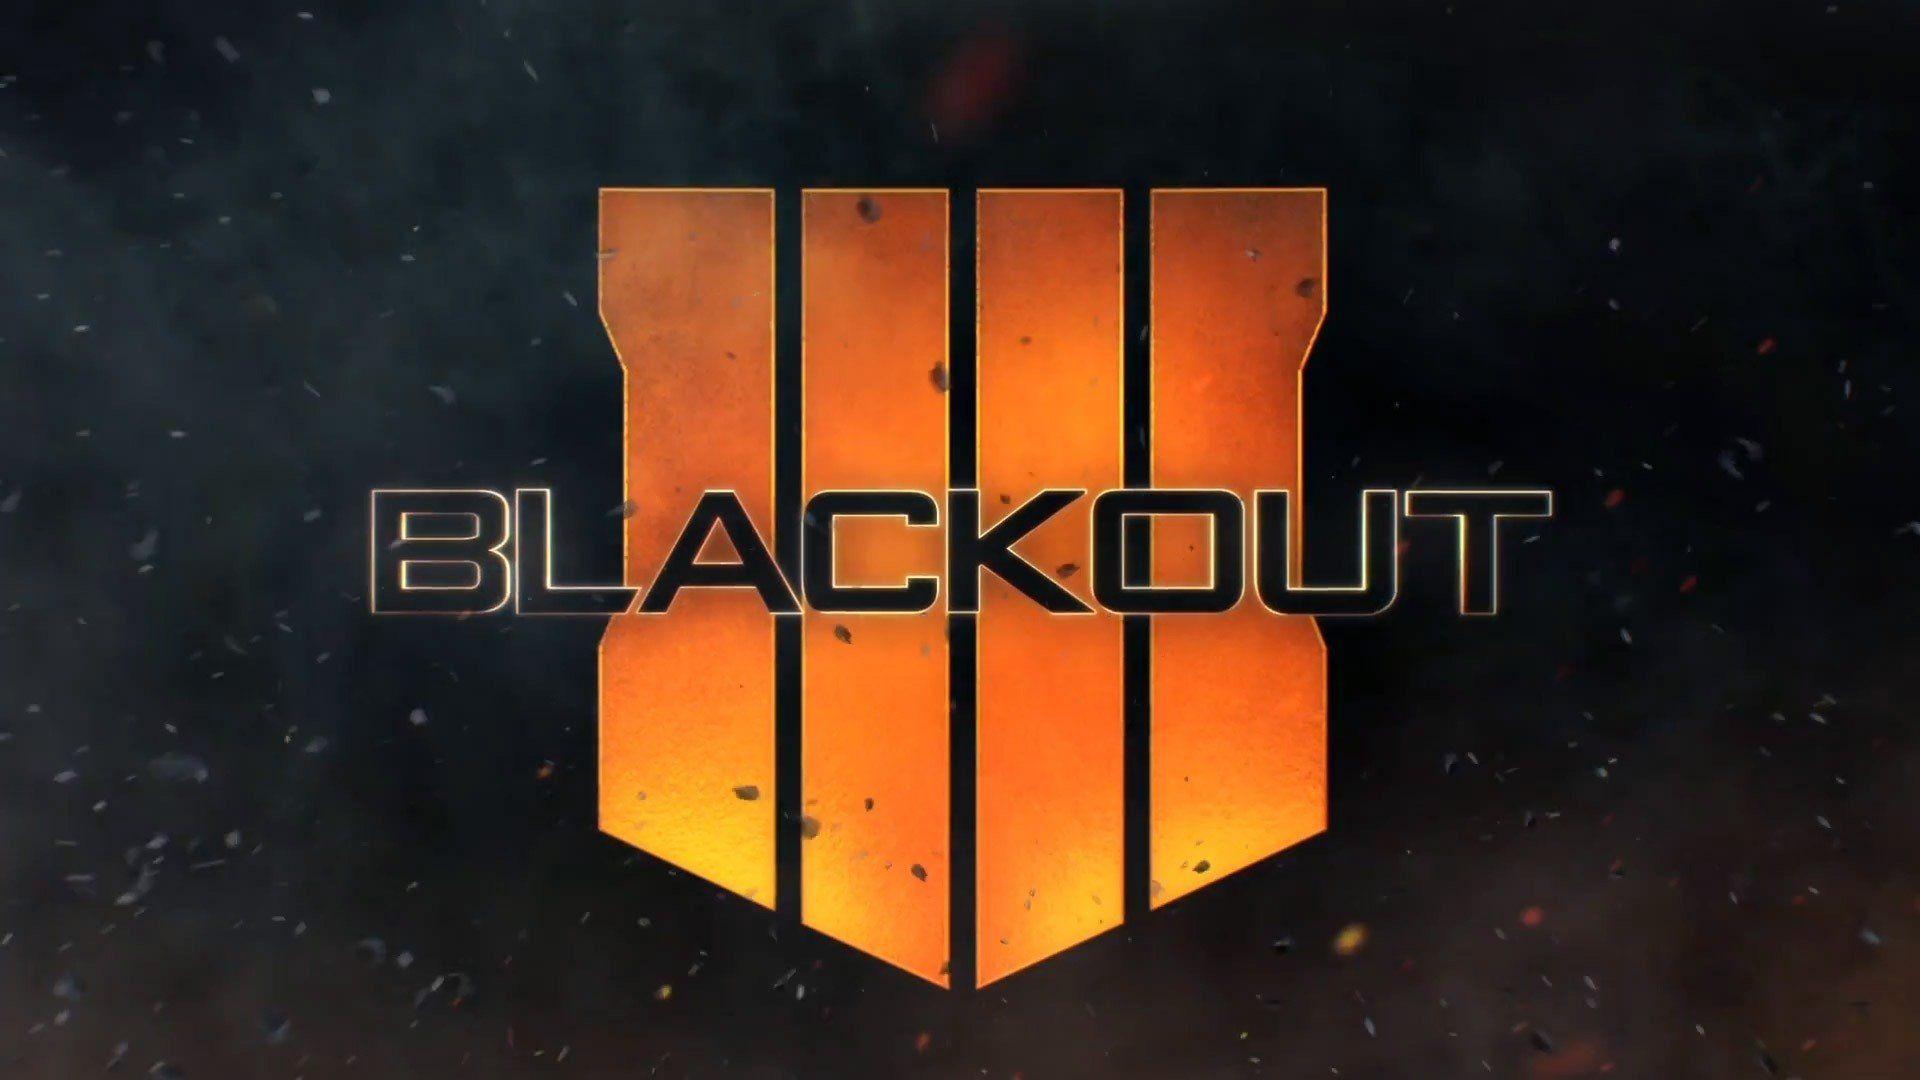 call of duty black ops 4 image